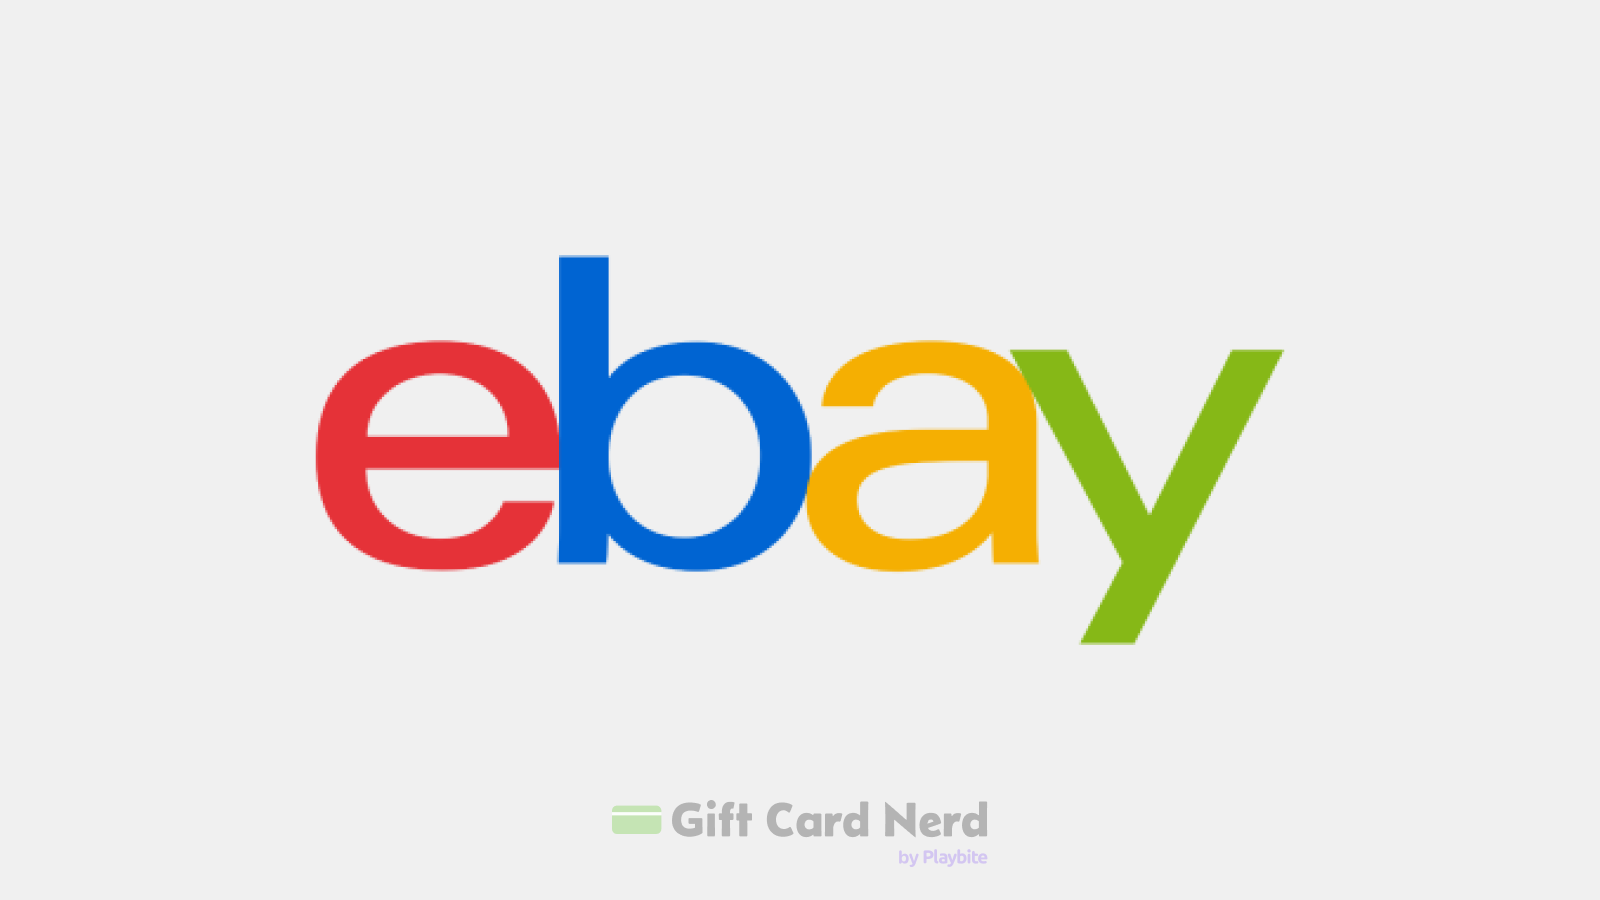 Can I Use an eBay Gift Card on Postmates?